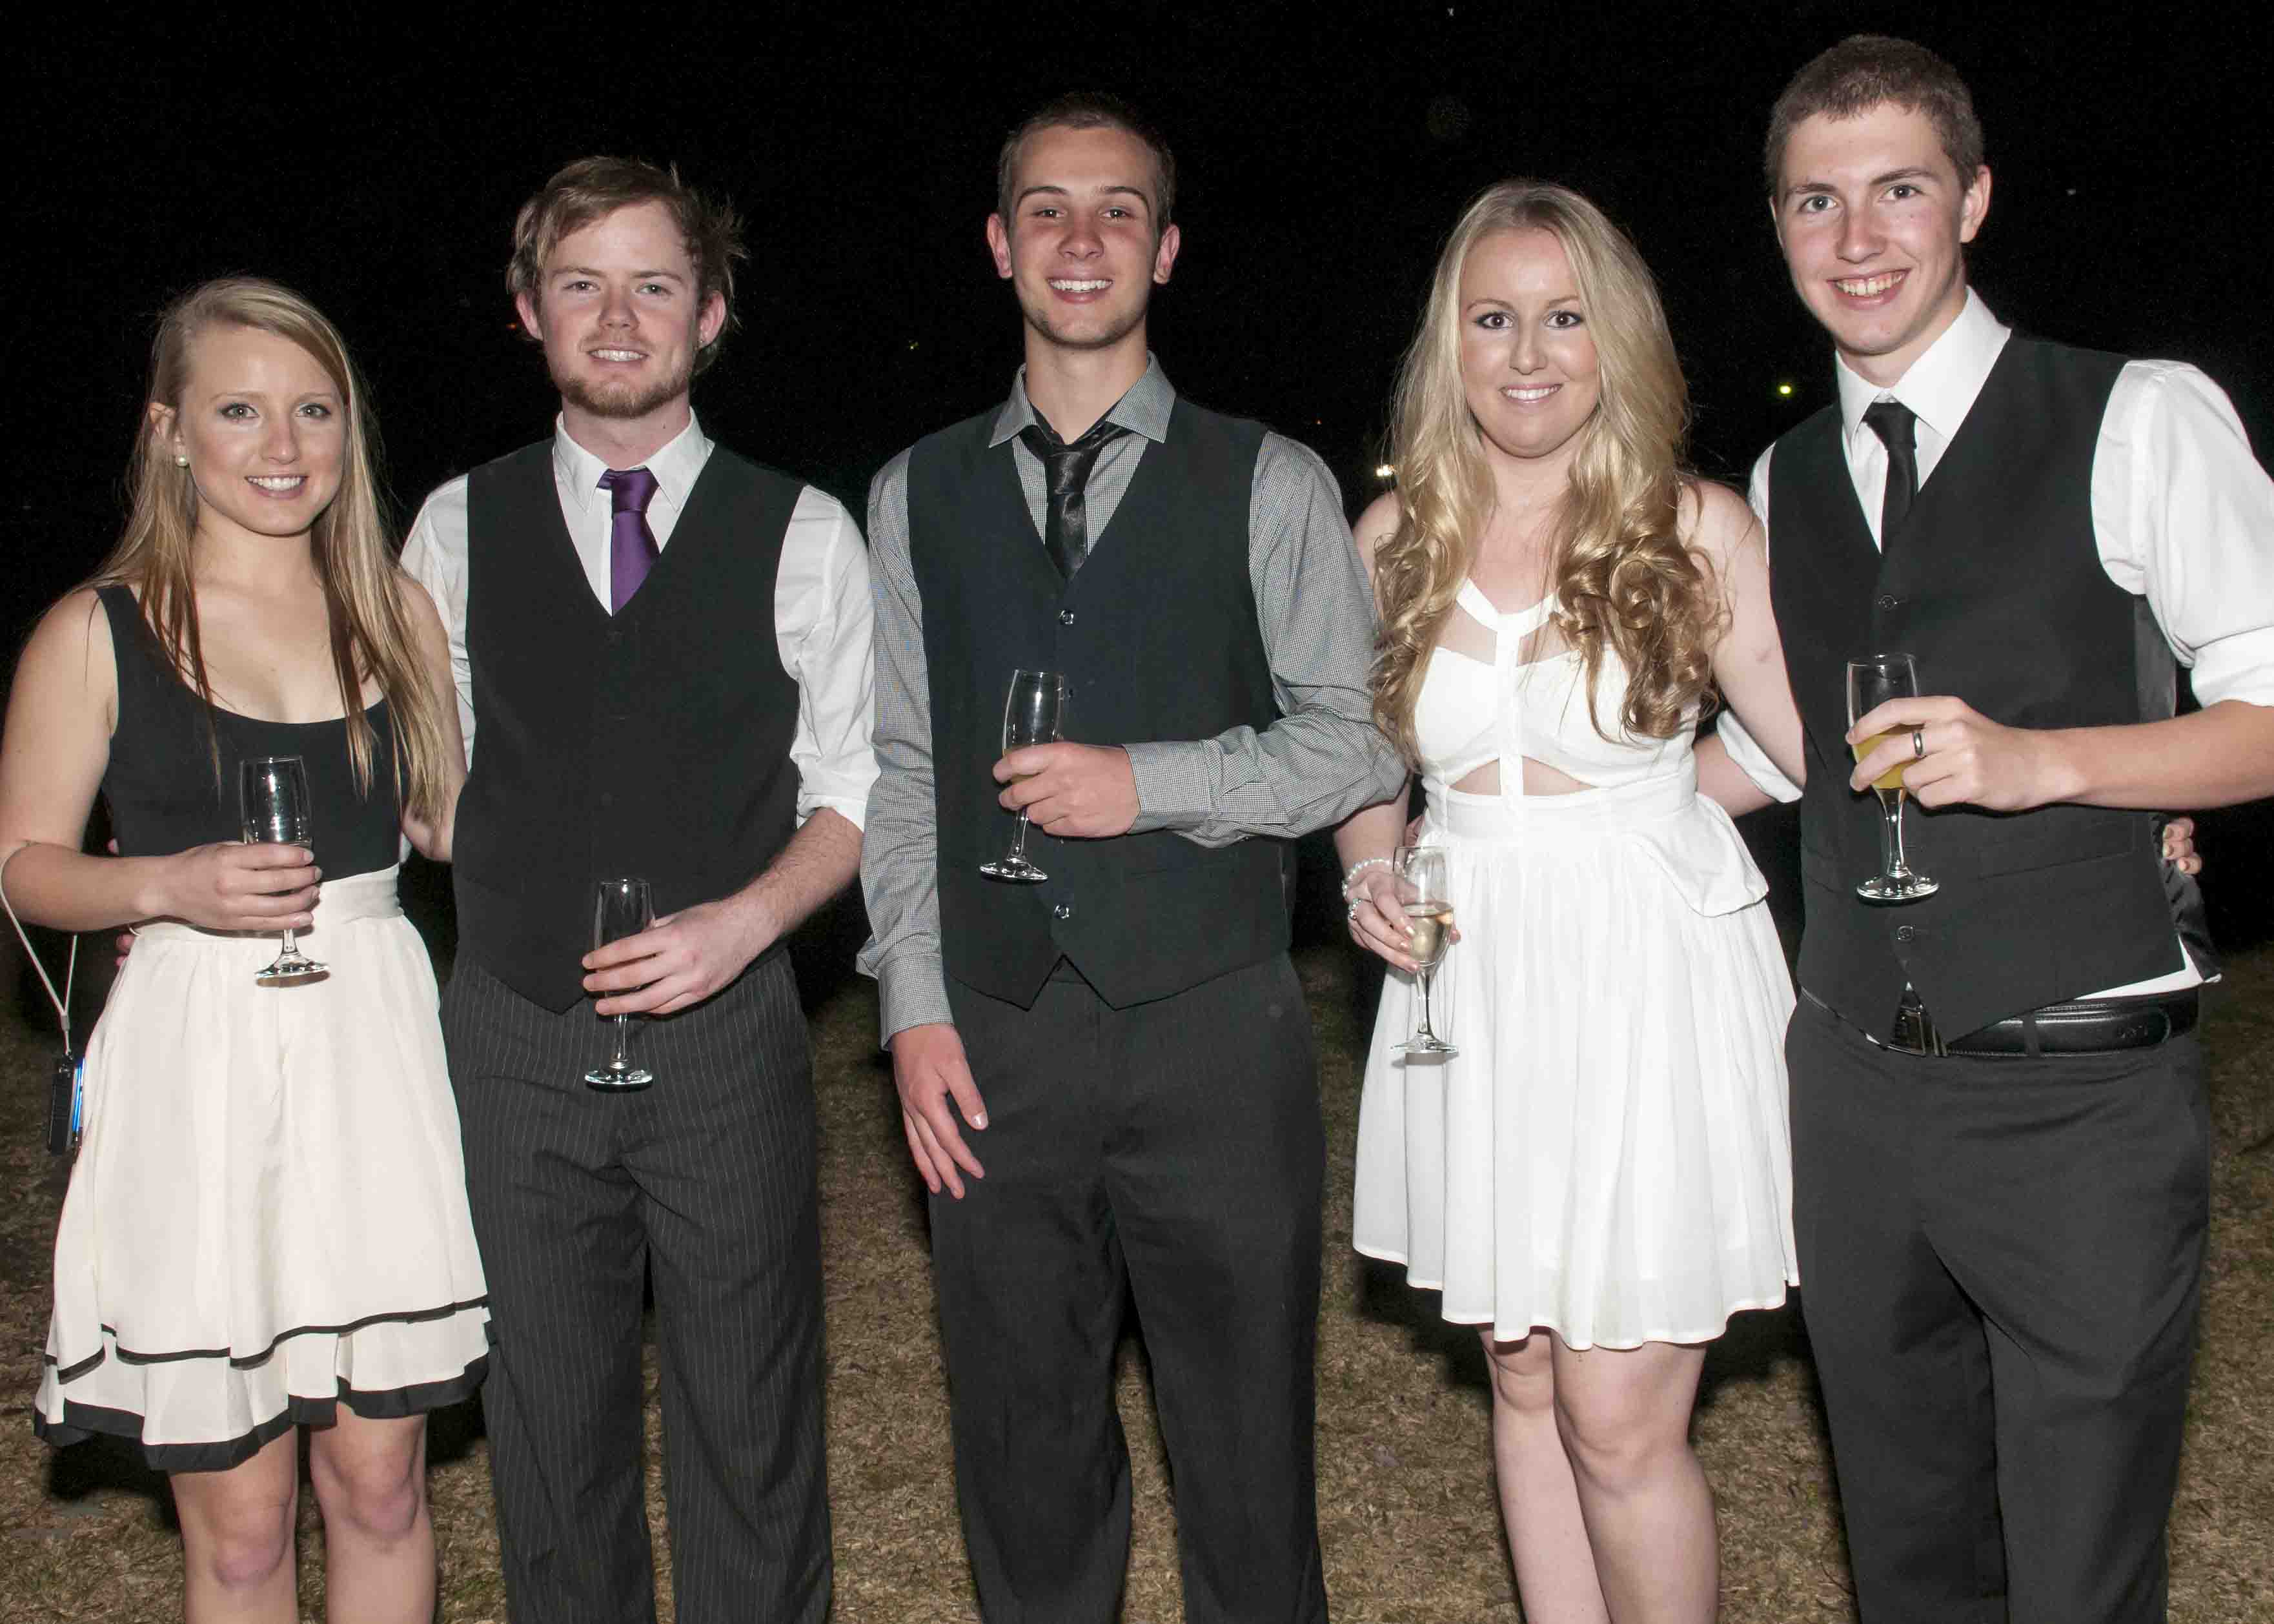 Students in formal attire with drinks